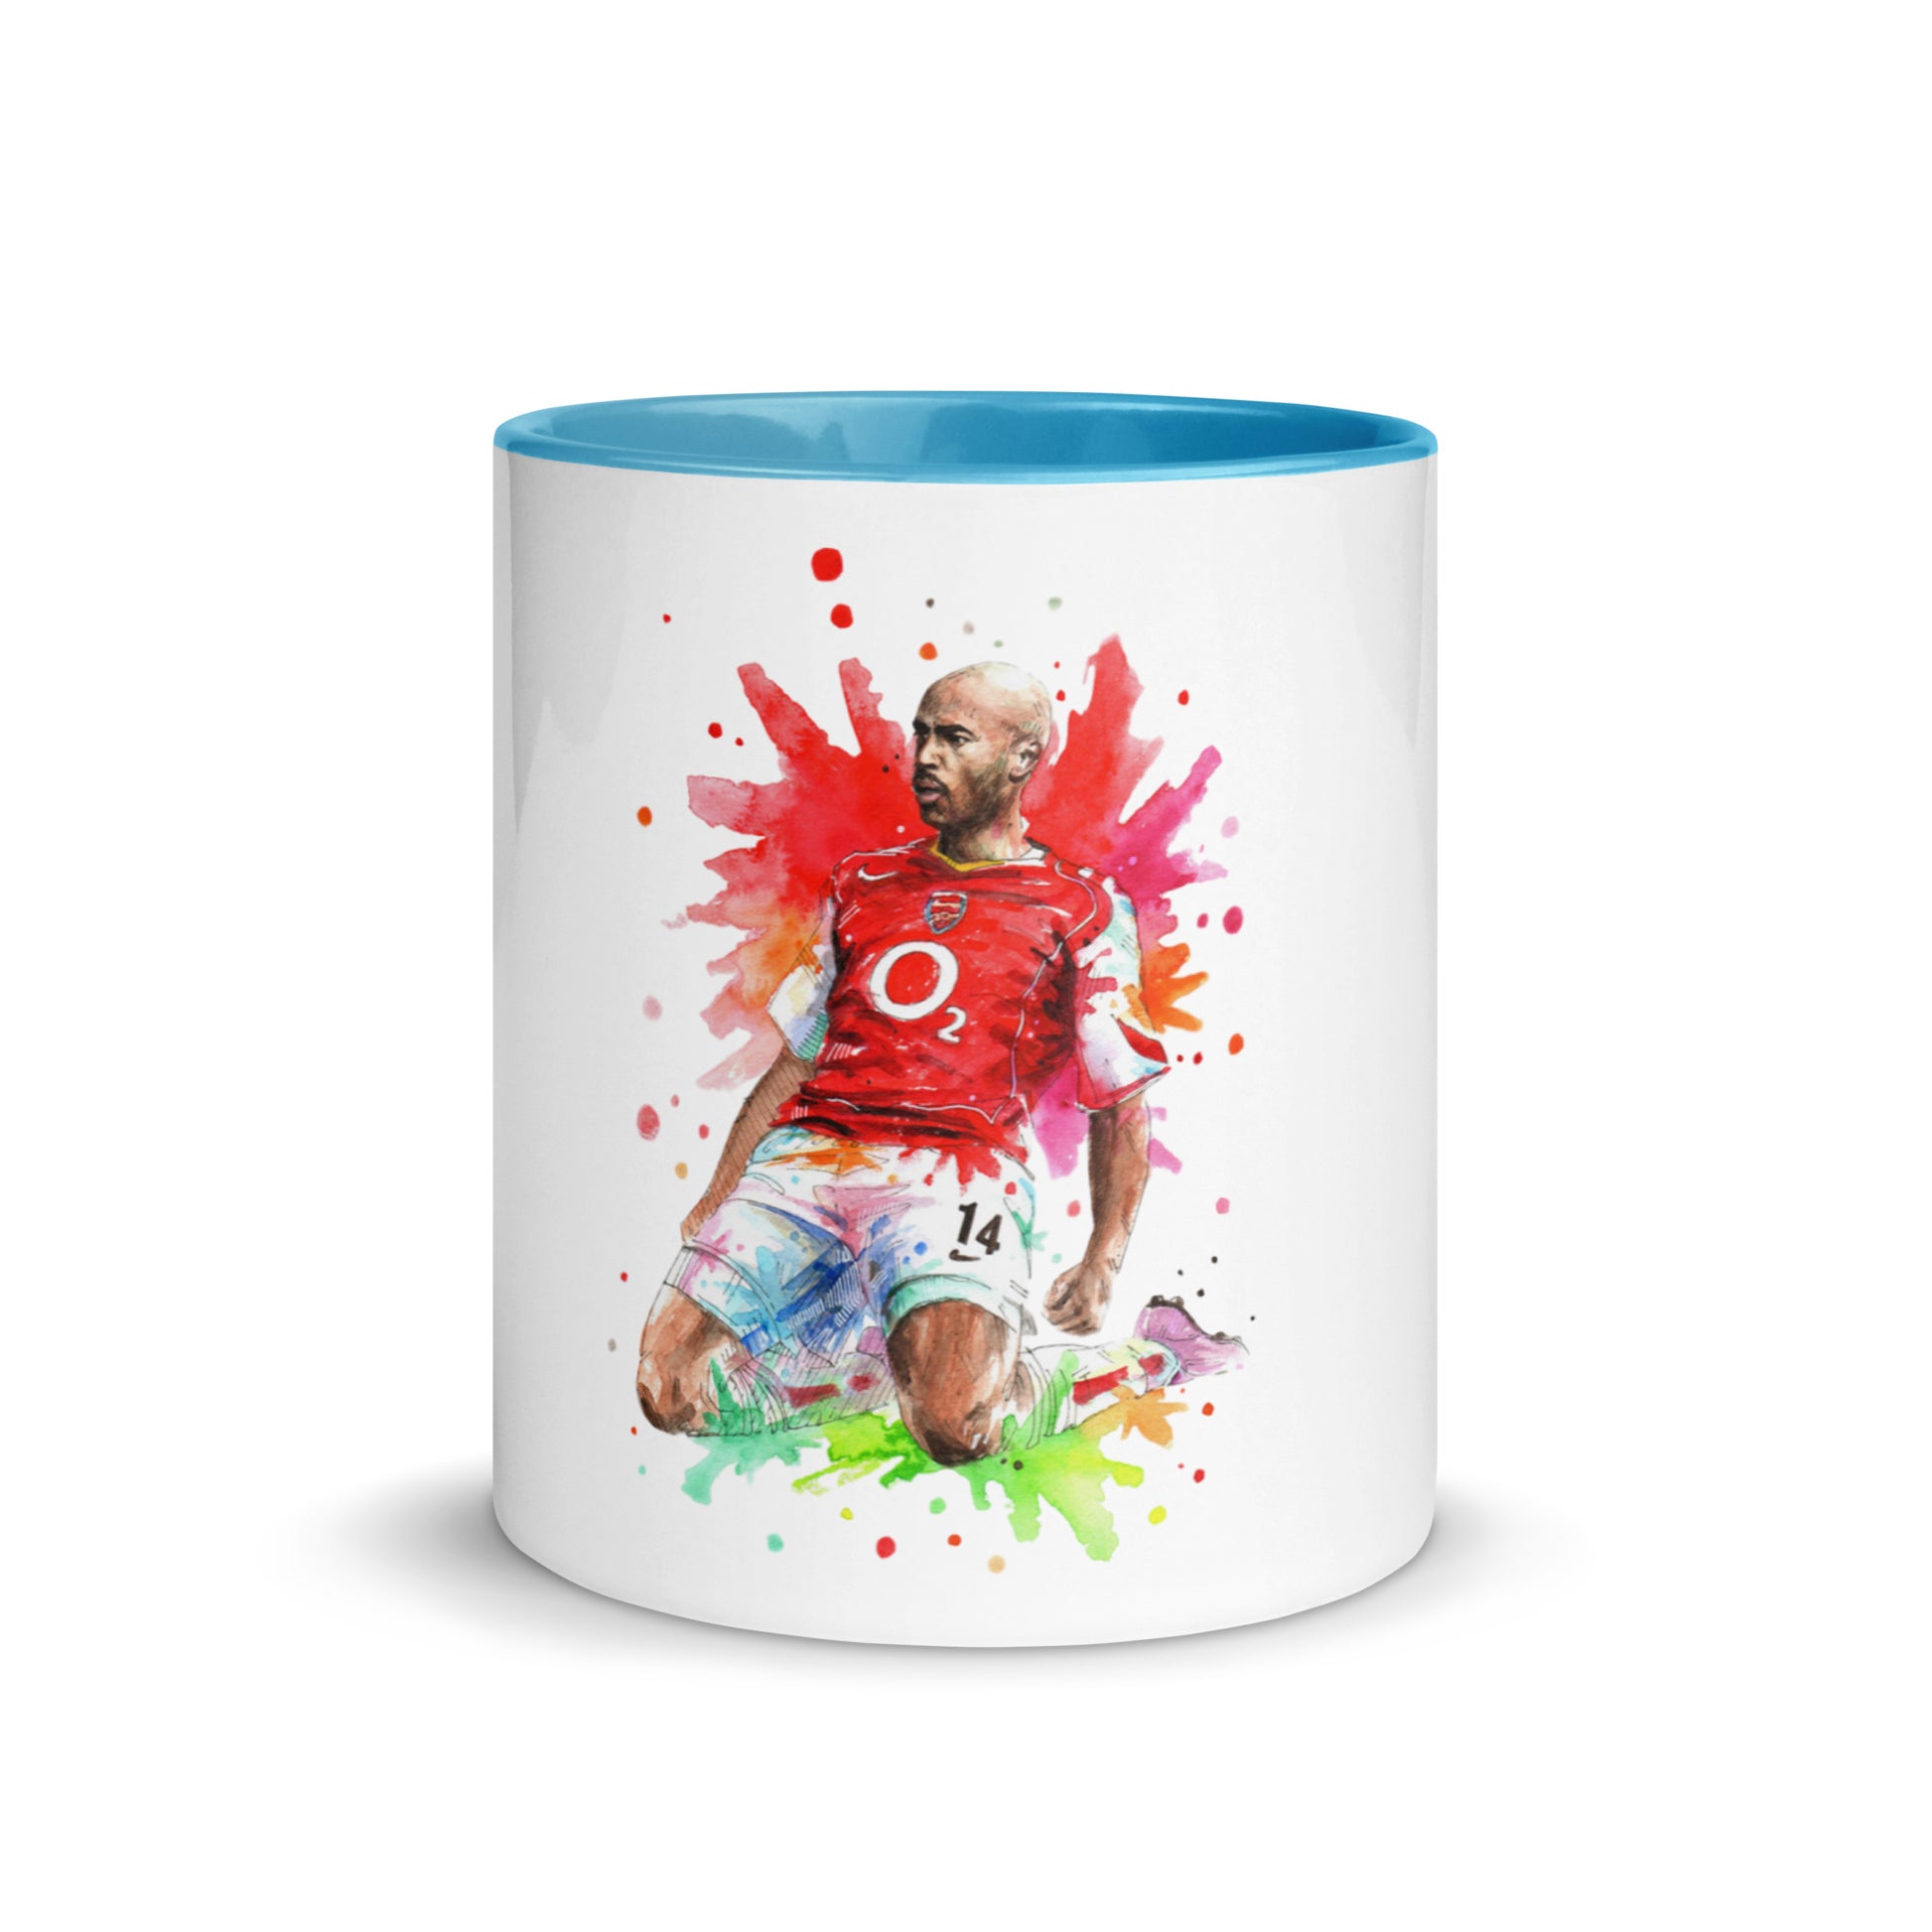 Arsenal Thierry Henry Vintage Coffee Mug with Color Inside - The 90+ Minute